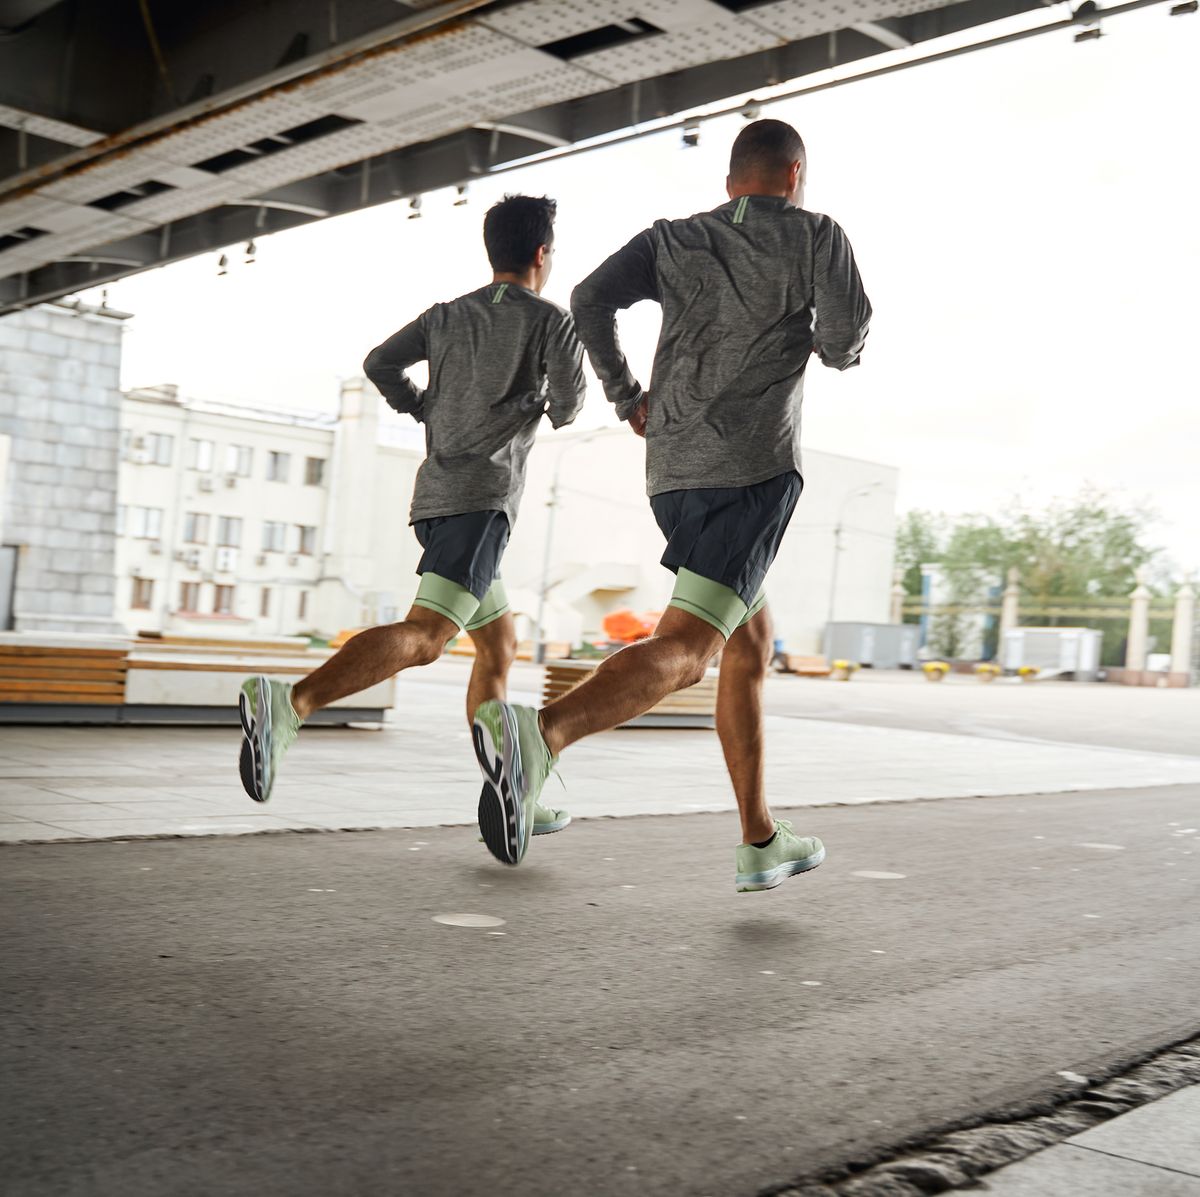 Running For Weight Loss & Burning Fat: The Science Behind Running!